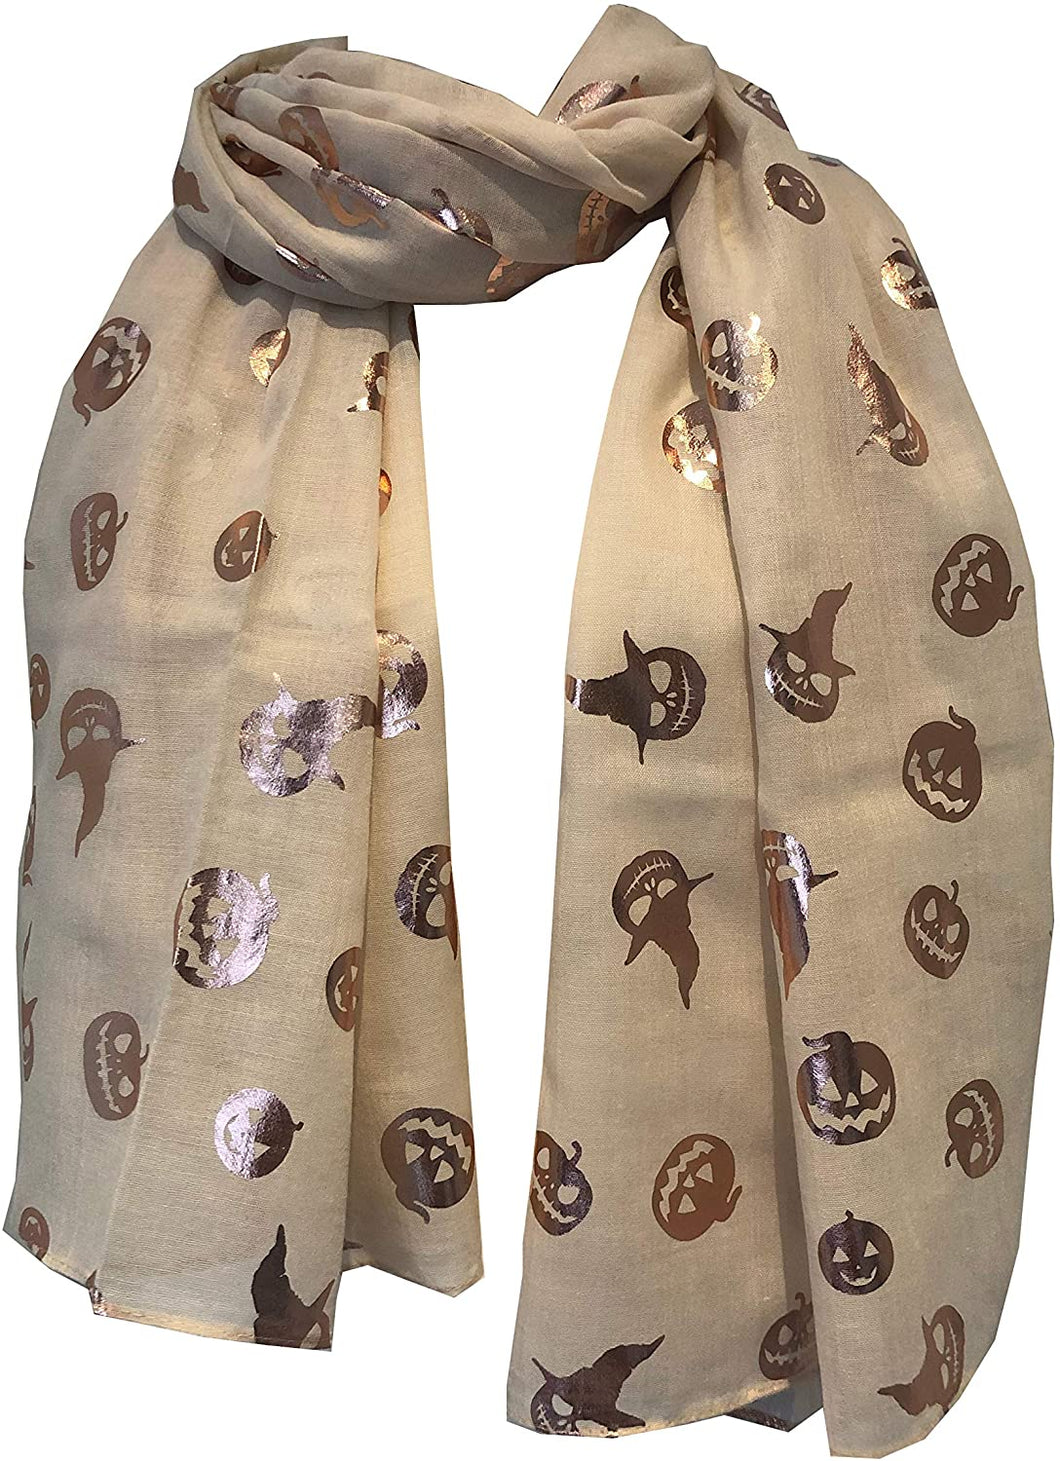 Gold pumpkins and witch design Halloween scarf, great as a present/gift.